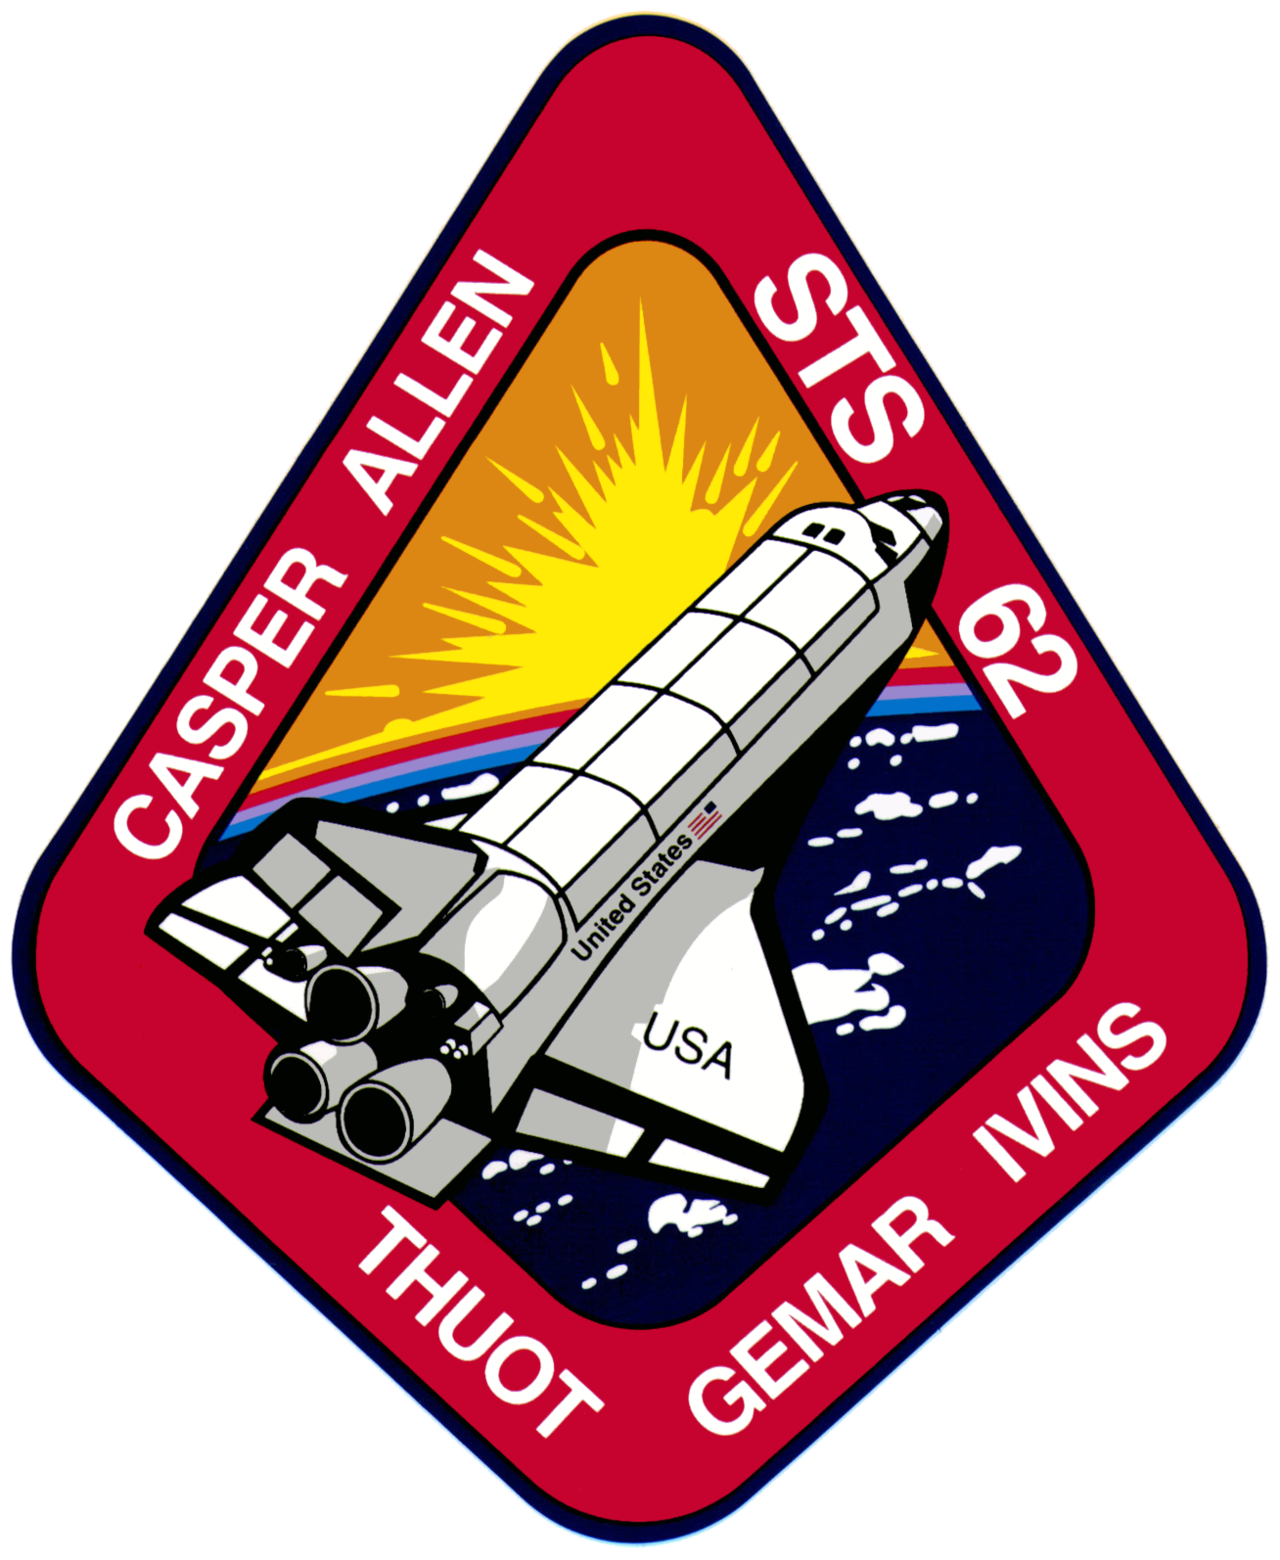 Mission patch for STS-62